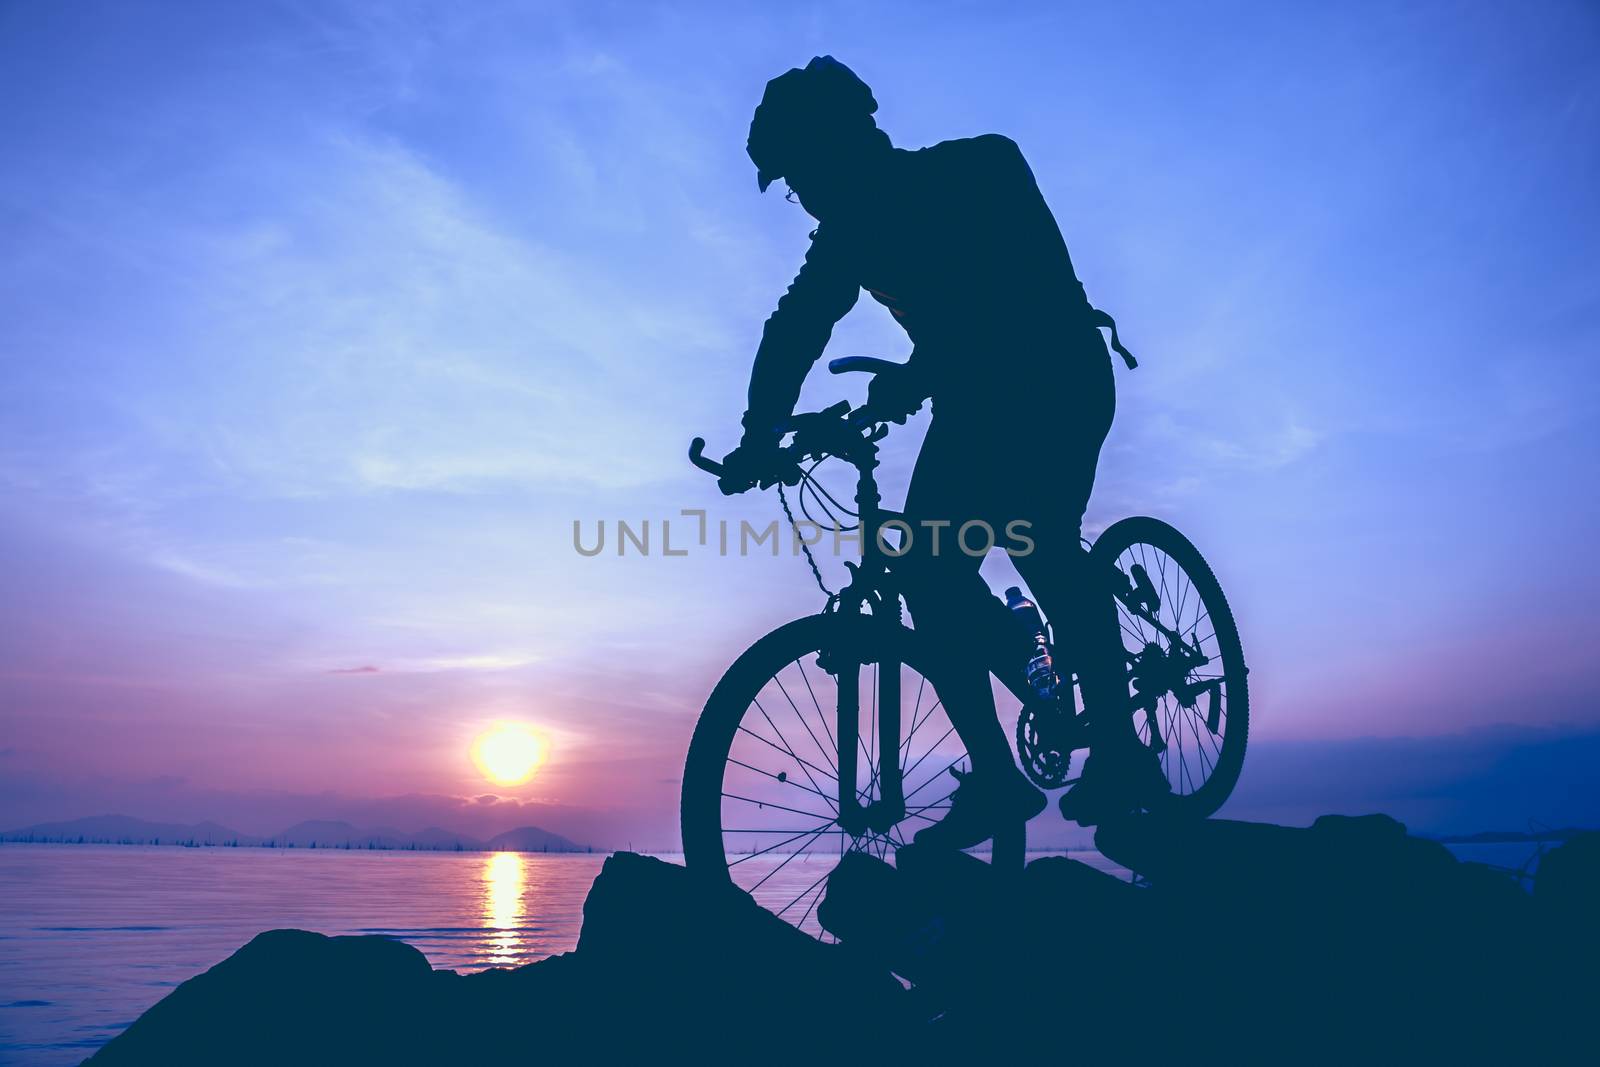 Silhouette of bicyclist riding the bike on a rocky trail at seaside, on colorful sunset sky background. Active outdoors lifestyle for healthy concept. Vintage style.